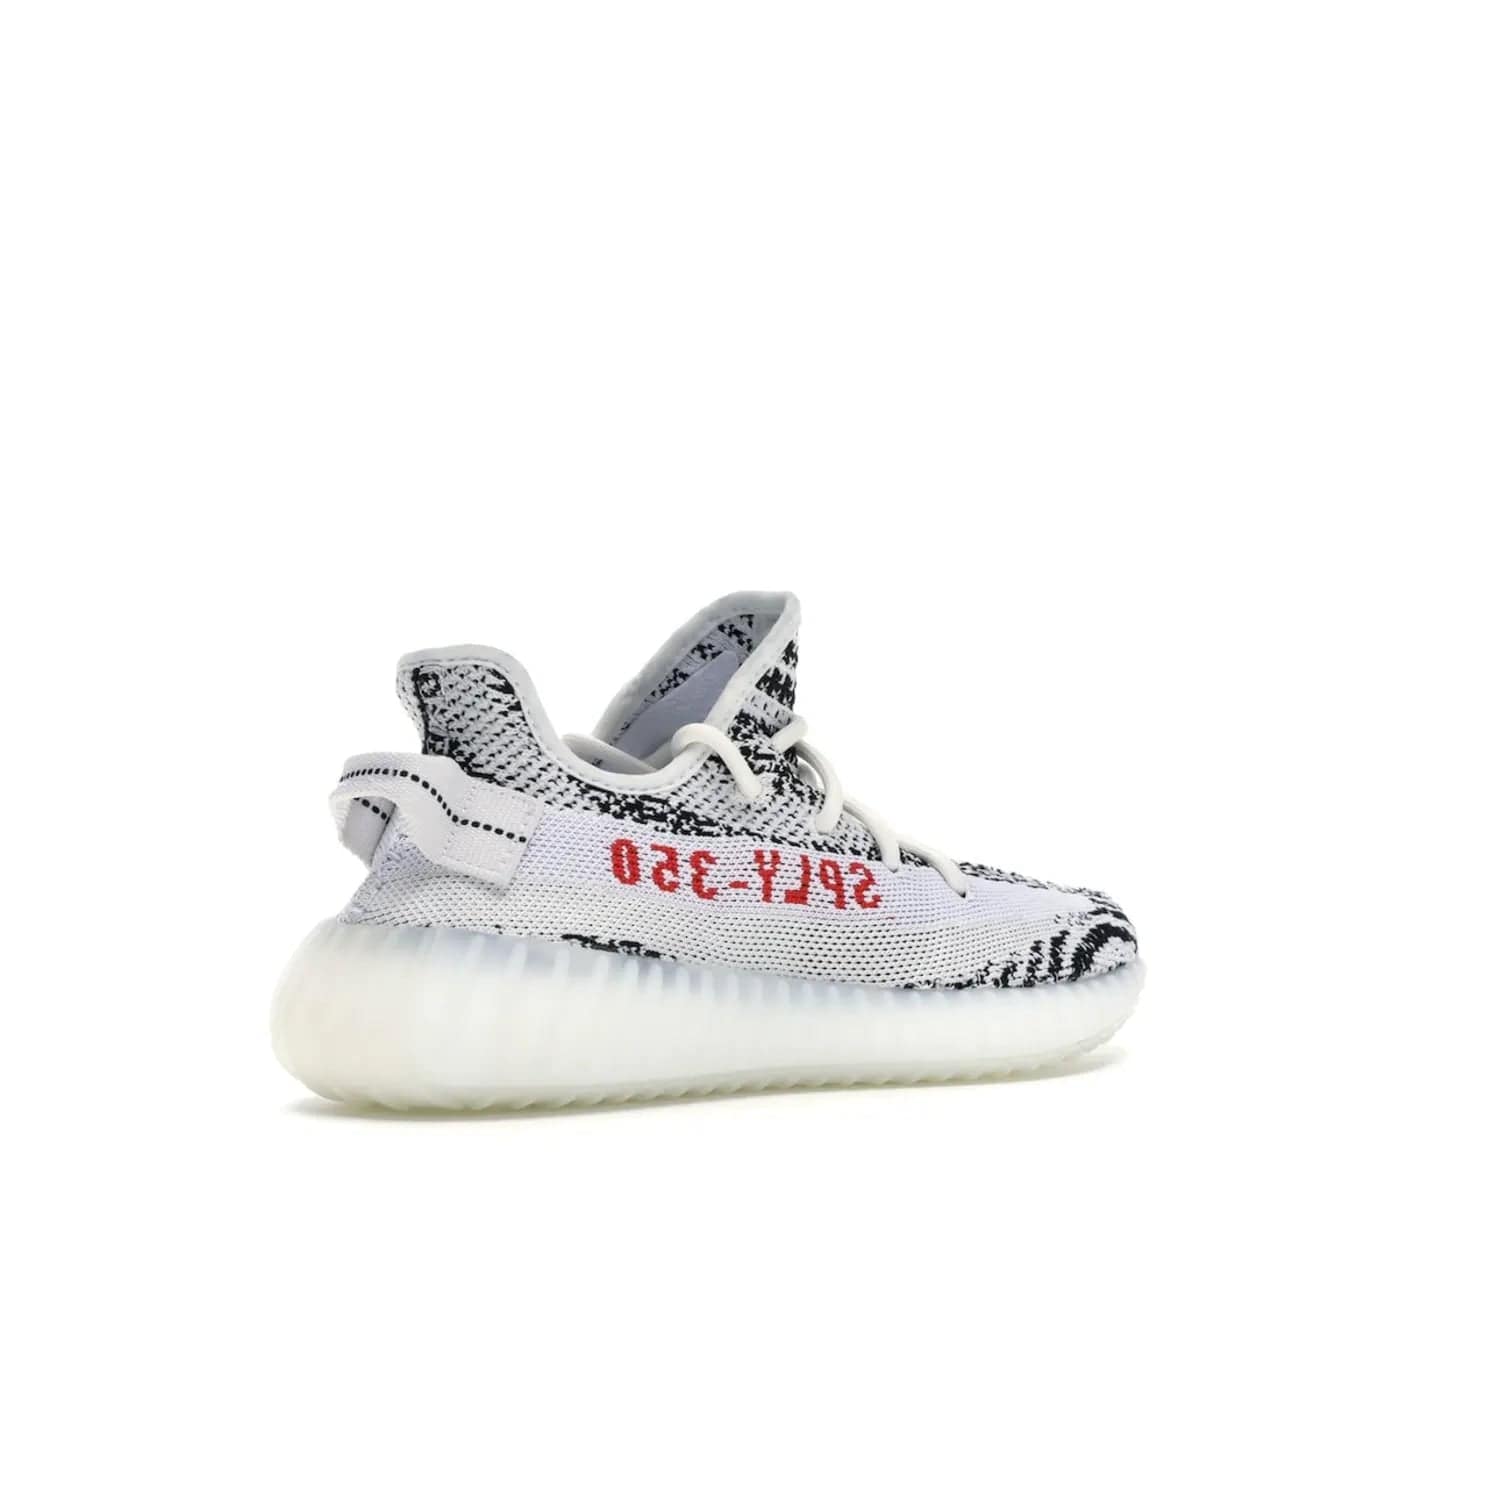 adidas Yeezy Boost 350 V2 Zebra - Image 33 - Only at www.BallersClubKickz.com - #
Score the iconic adidas Yeezy Boost 350 V2 Zebra for a fashionable addition to your street-style. Featuring a Primeknit upper and Boost sole, you'll look great and feel comfortable with every step.